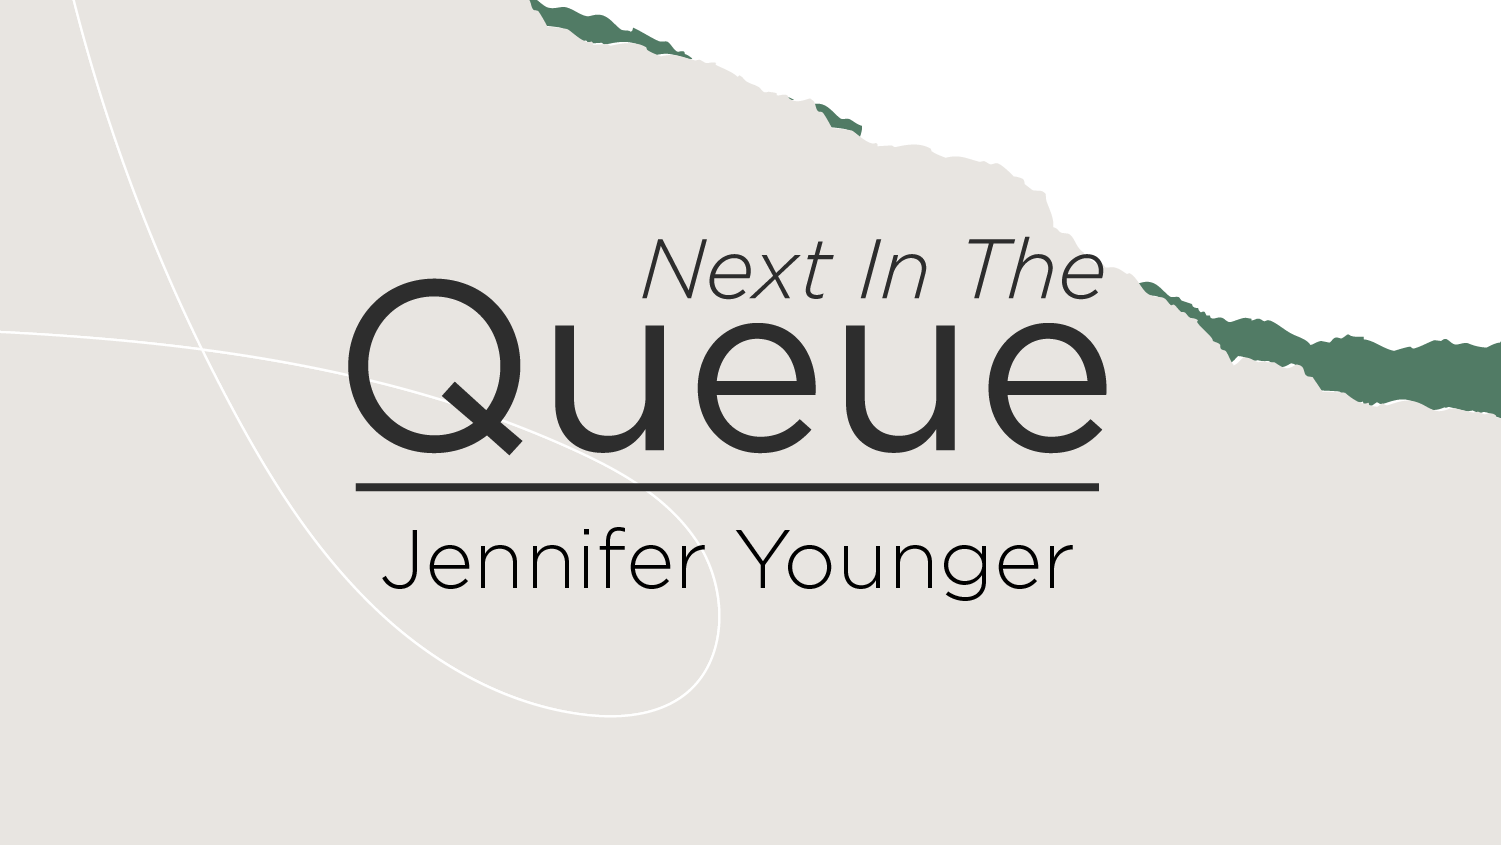 blog post cover graphic for The Queue featuring Jennifer Younger